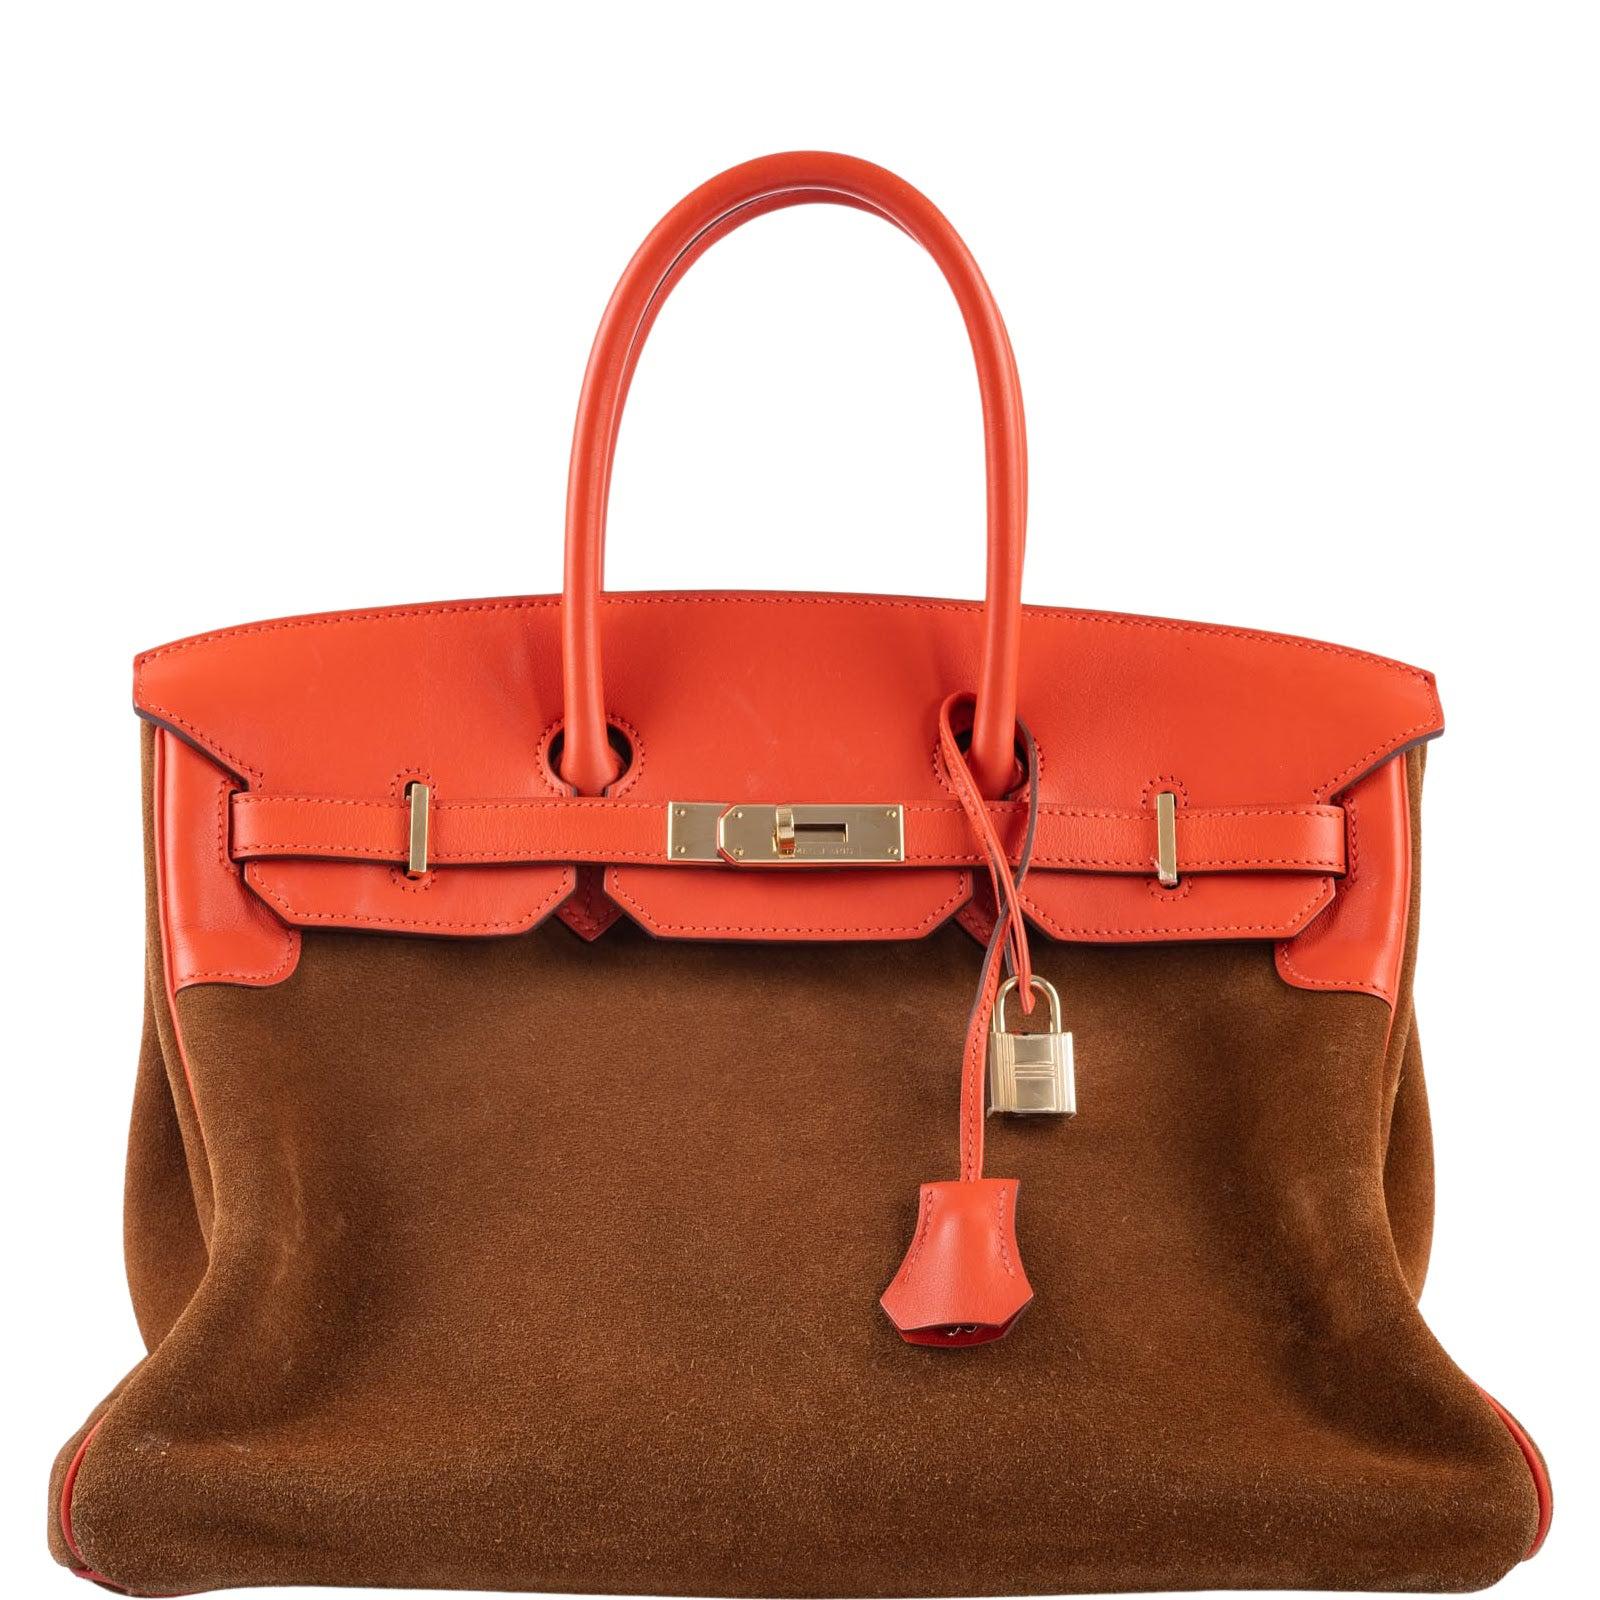 Hermès Grizzly Birkin 35 Capucine Evercolor and Fauve Suede Permabrass Hardware